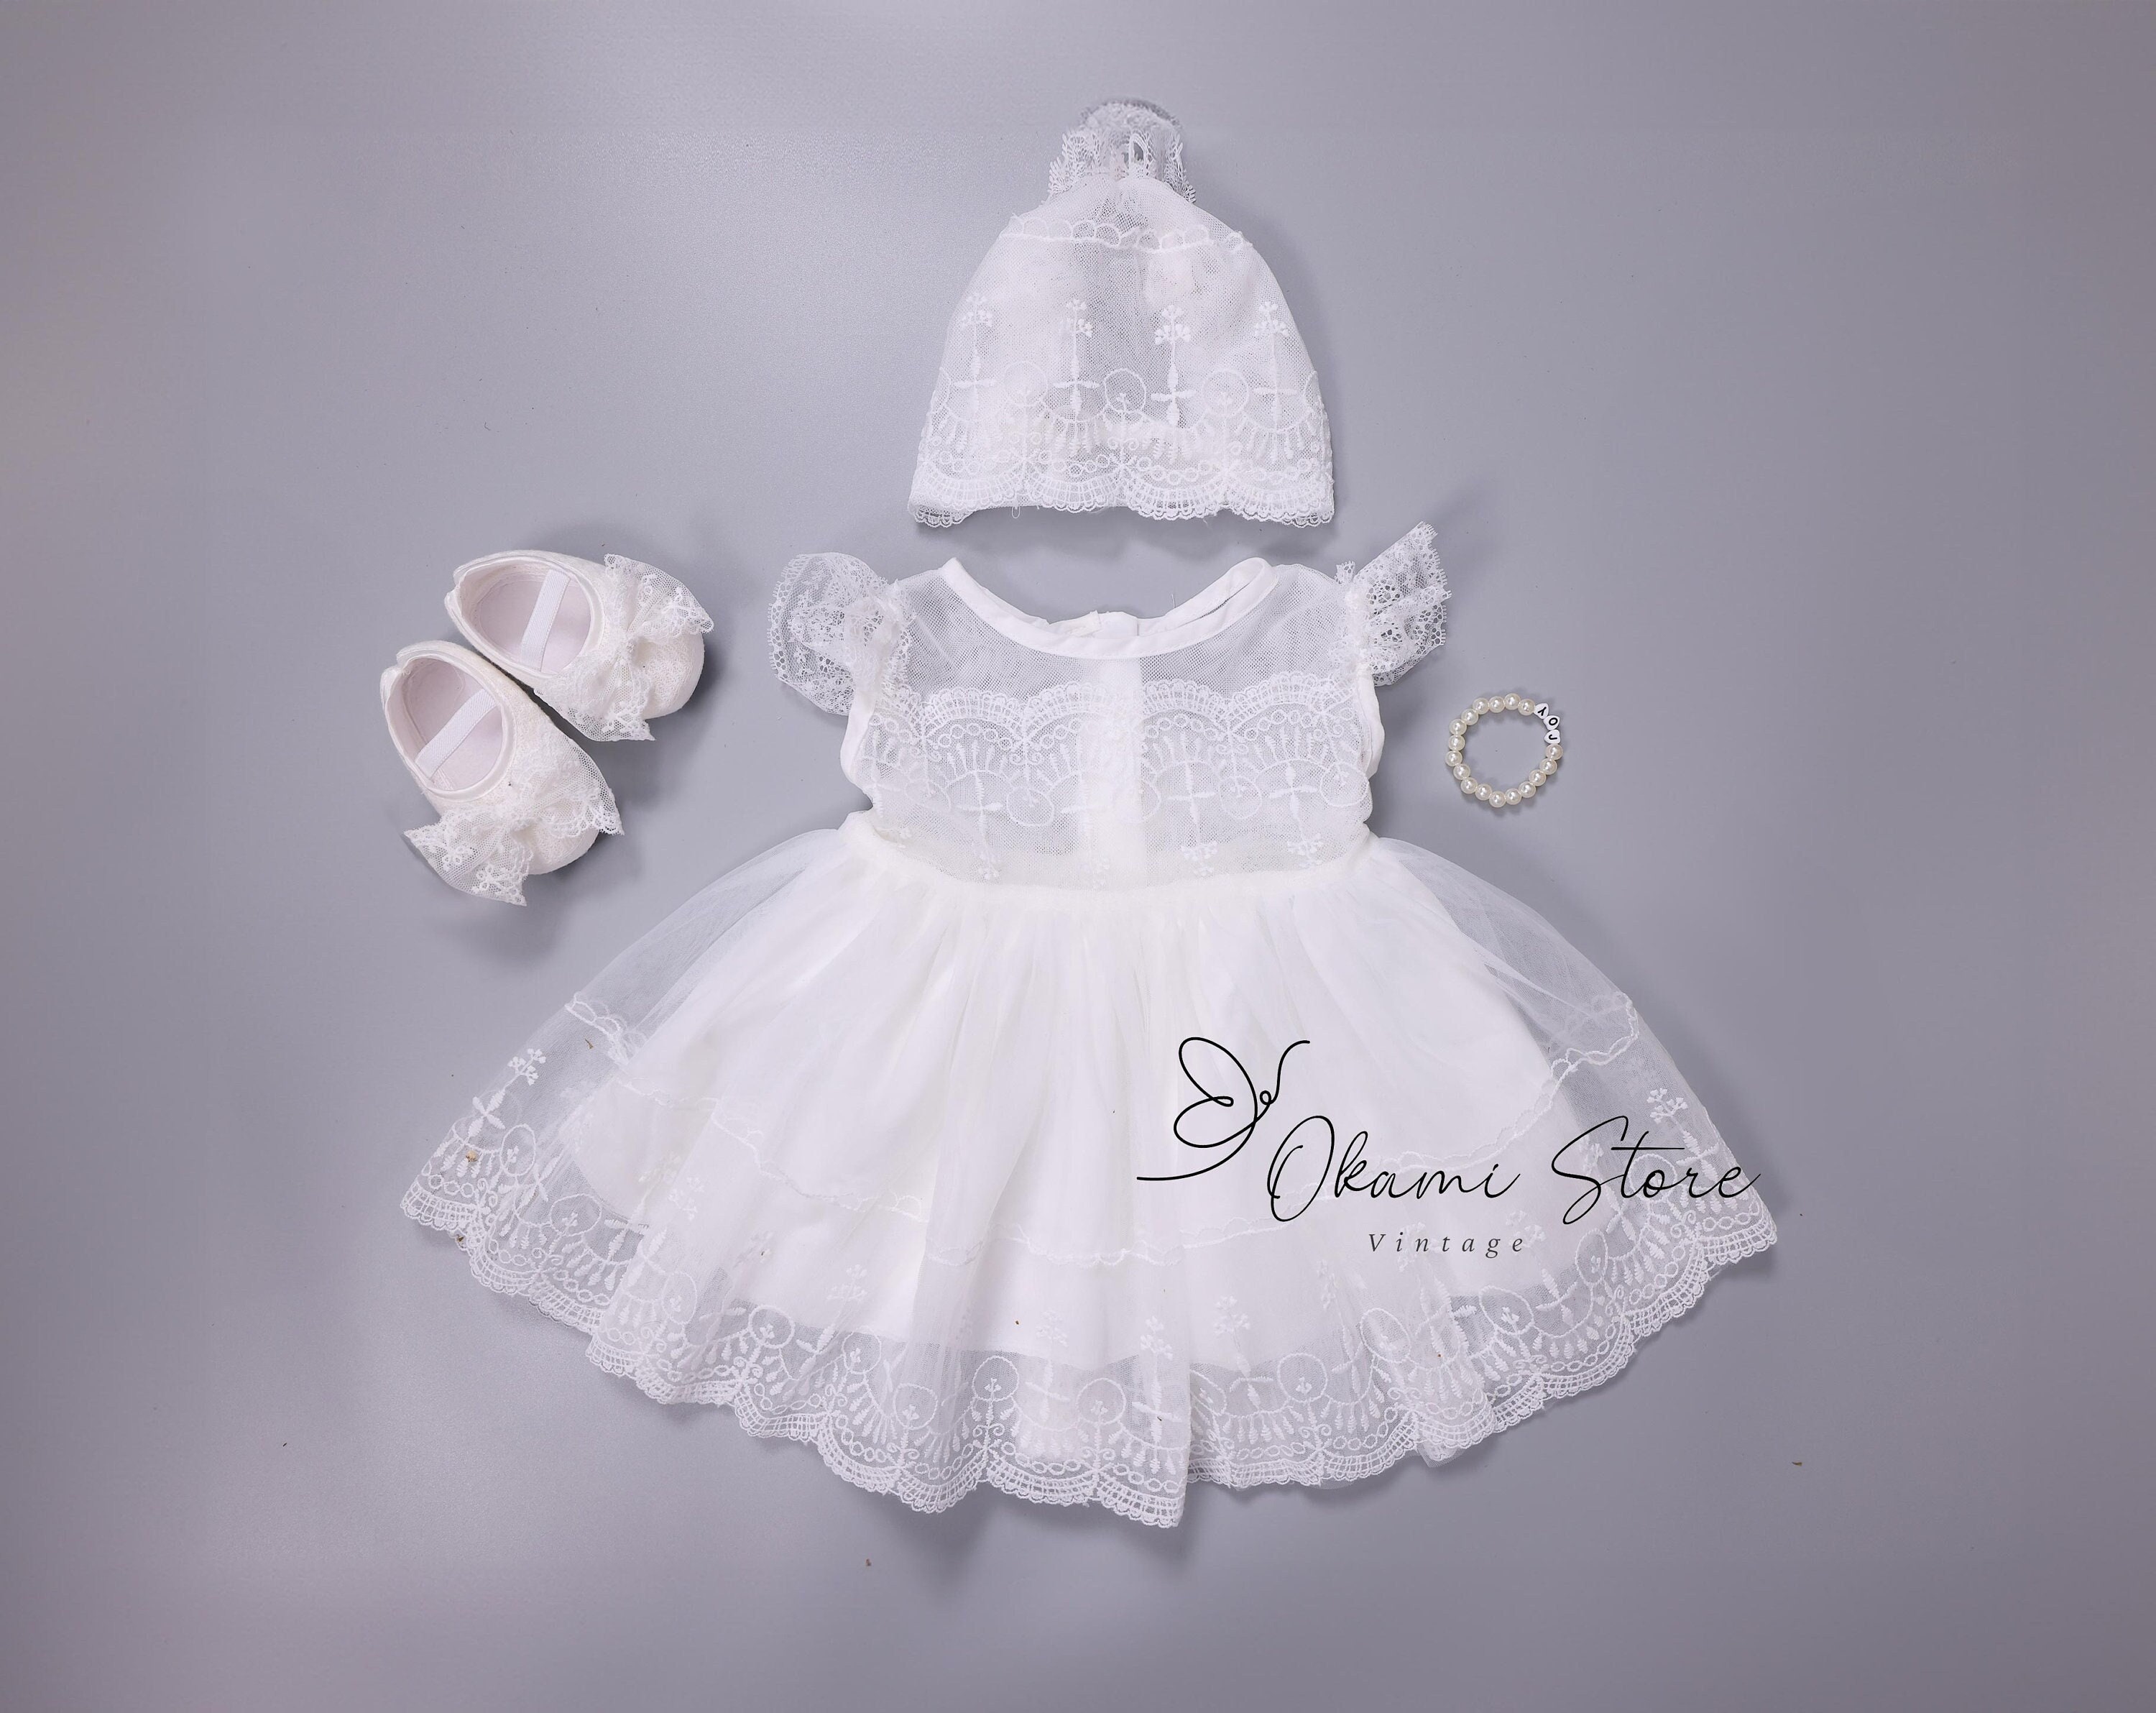 4 Piece Set Baby Girls Lace Baptism Christening Dress with Matching Bonnet and Headband, Baby Girls Lace Dress, Baby Girls Christening Dress